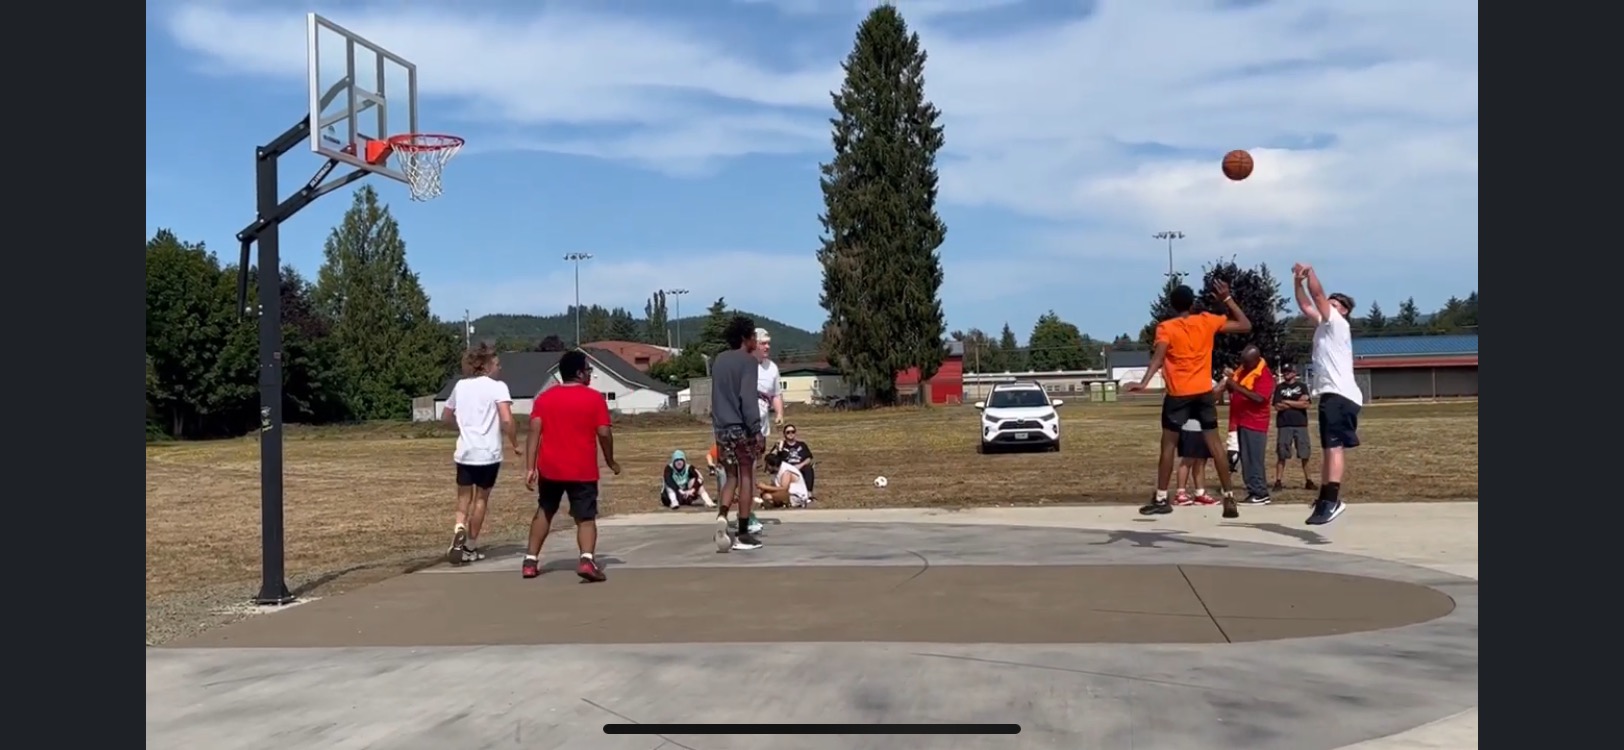 A player with a defender shoots from distance on an outdoor basketball court.